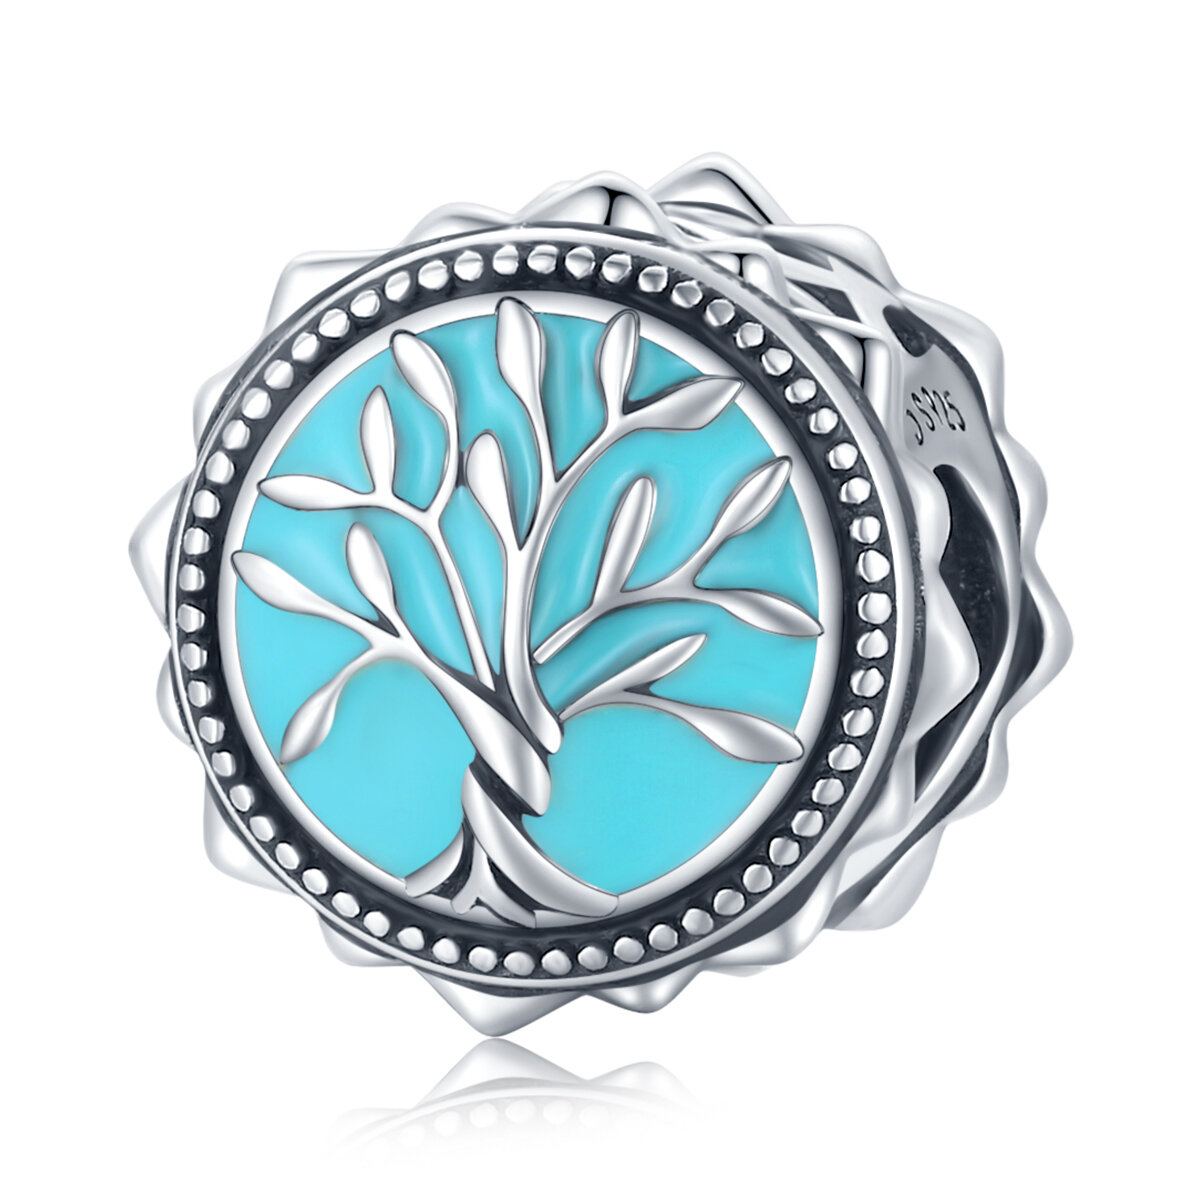 GemKing BSC503 Blue life tree S925 Sterling Silver Charm